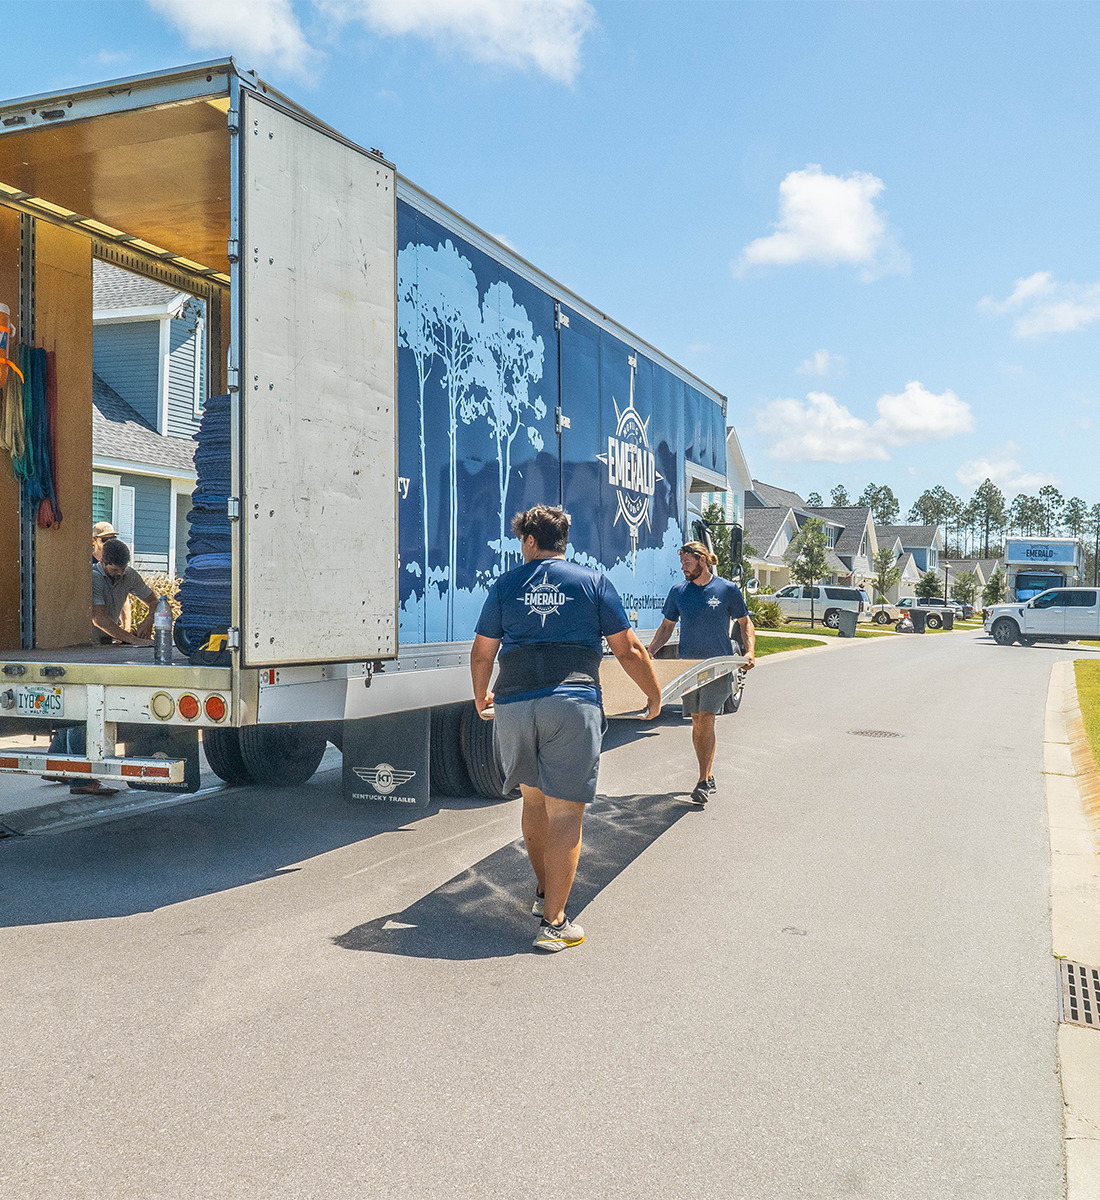 Emerald Moving and Storage is a professional moving company based in Pensacola, FL, offering a wide range of moving and storage services to clients on the Emerald Coast.